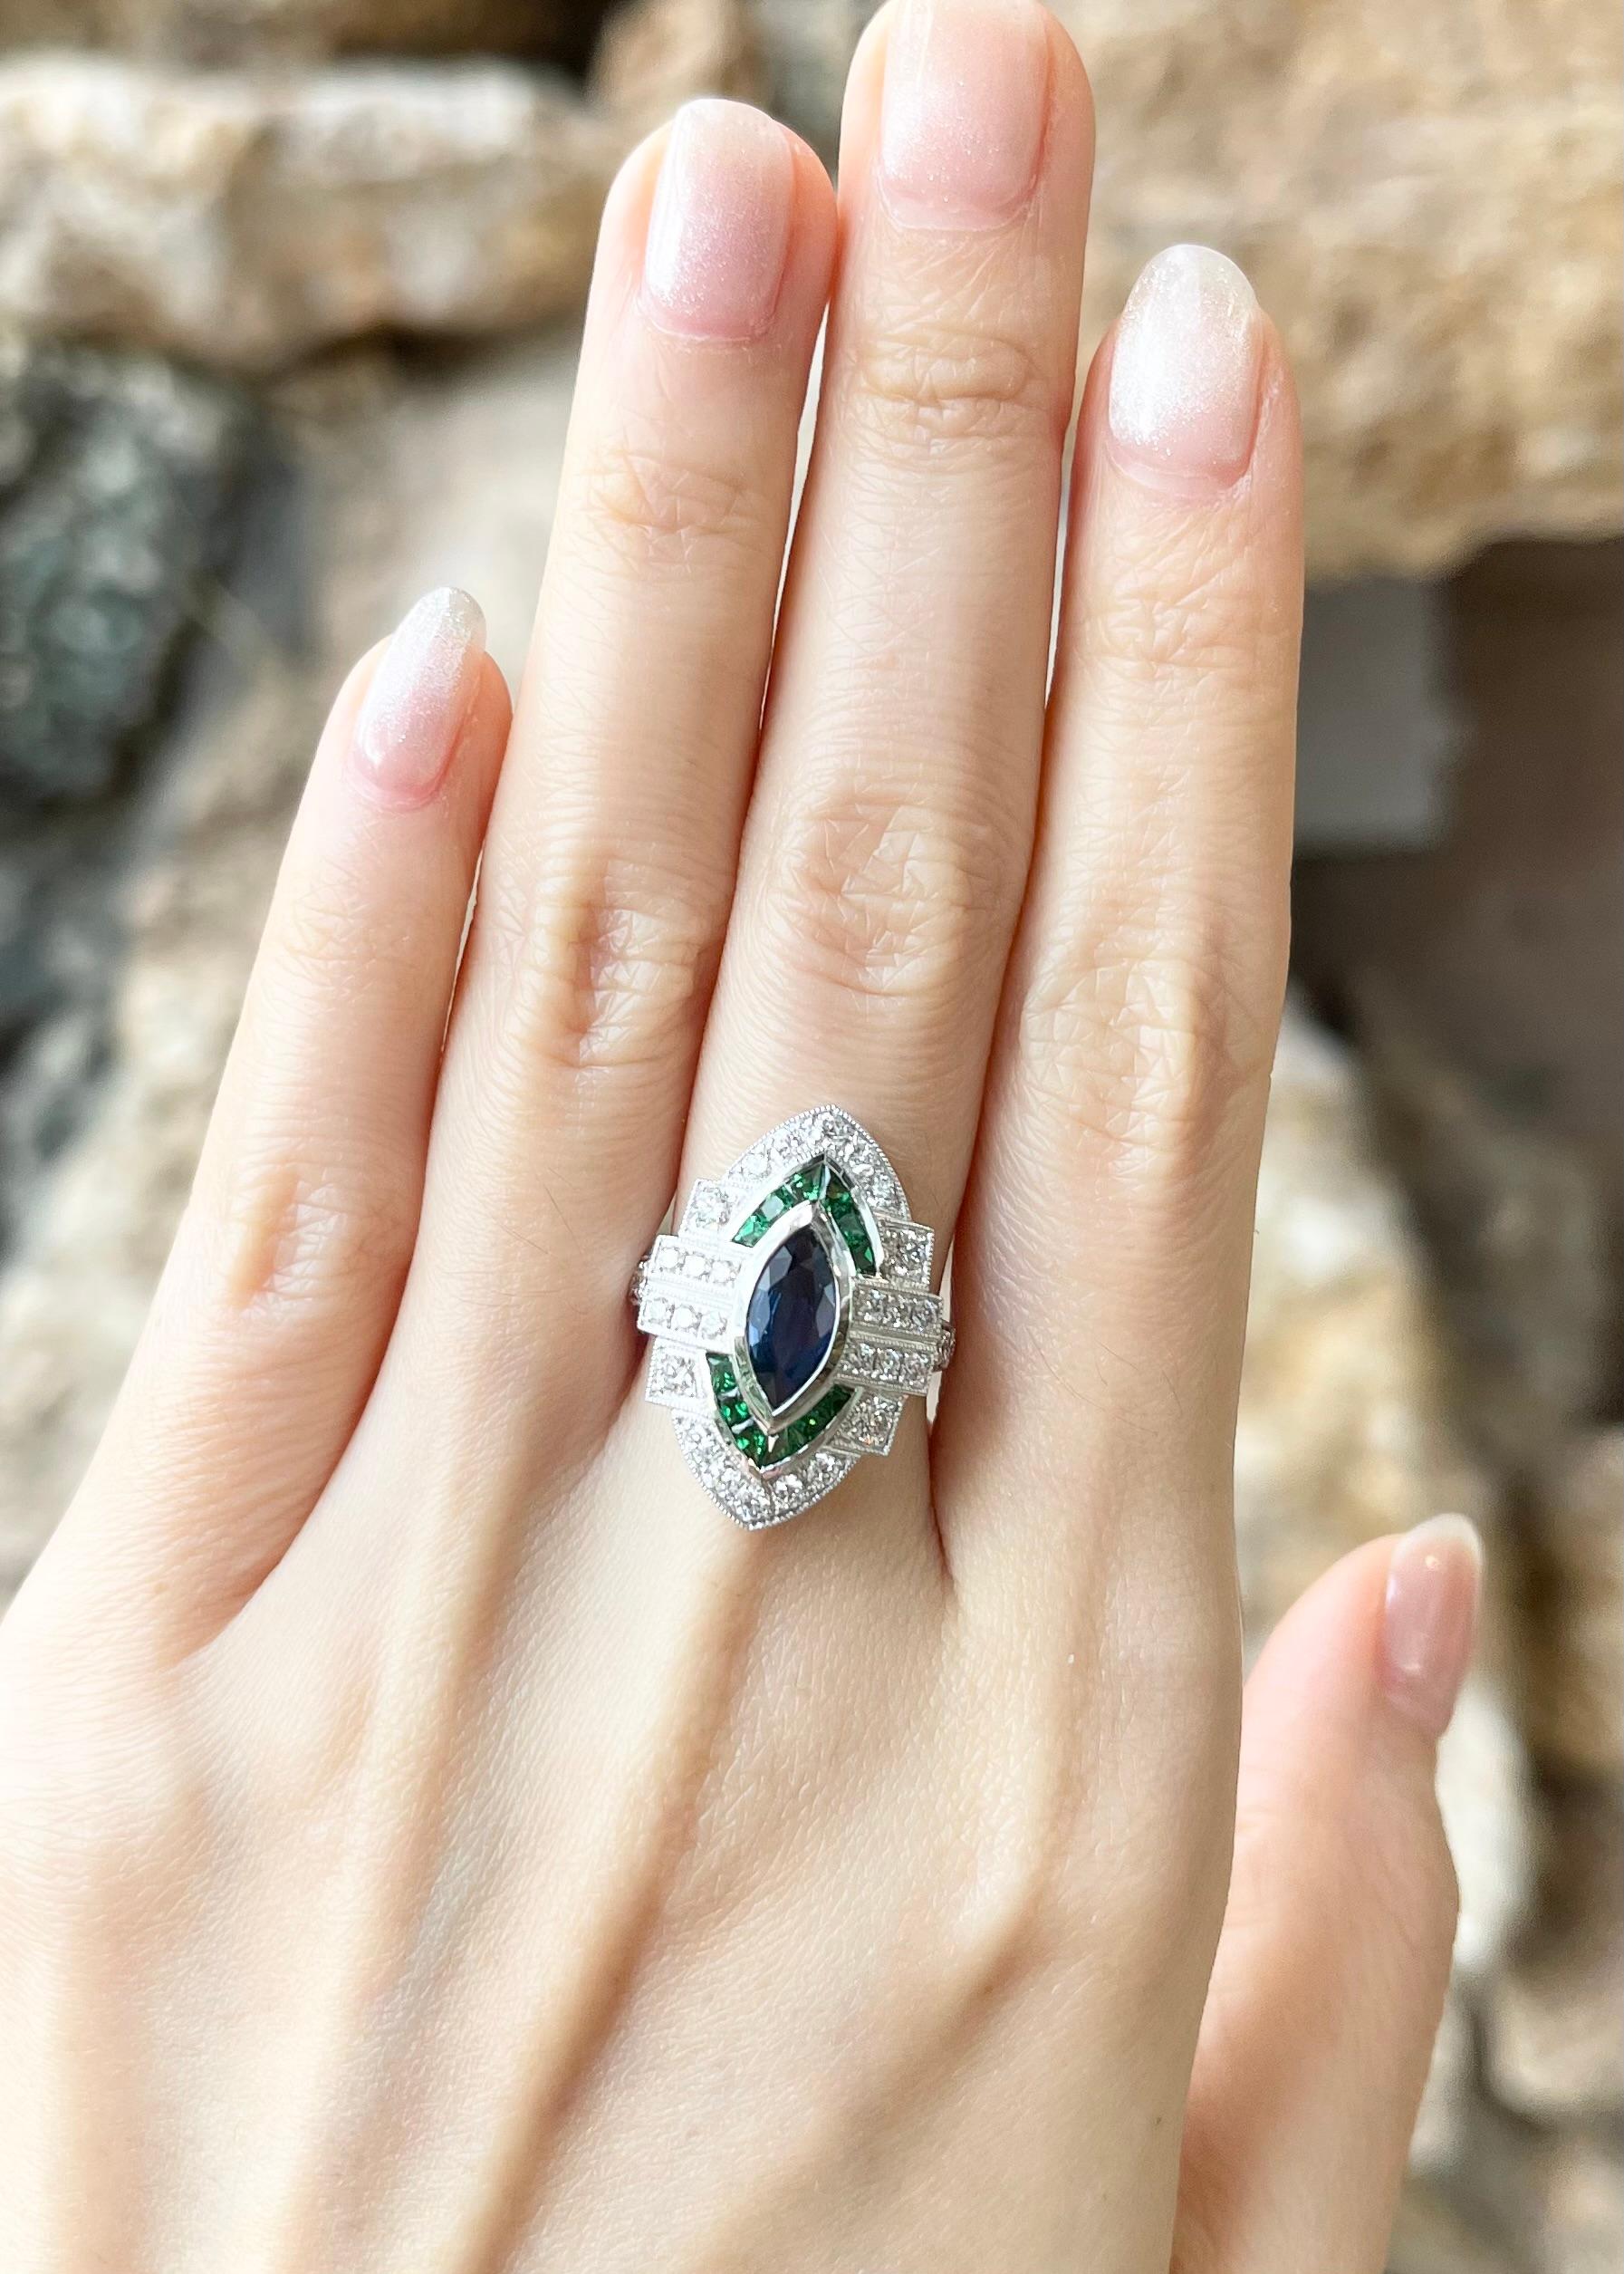 Blue Sapphire 1.13 carats, Tsavorite 0.95 carat and Diamond 0.90 carat Ring set in 18K White Gold Settings

Width:  1.6 cm 
Length: 2.4 cm
Ring Size: 53
Total Weight: 6.66 grams

